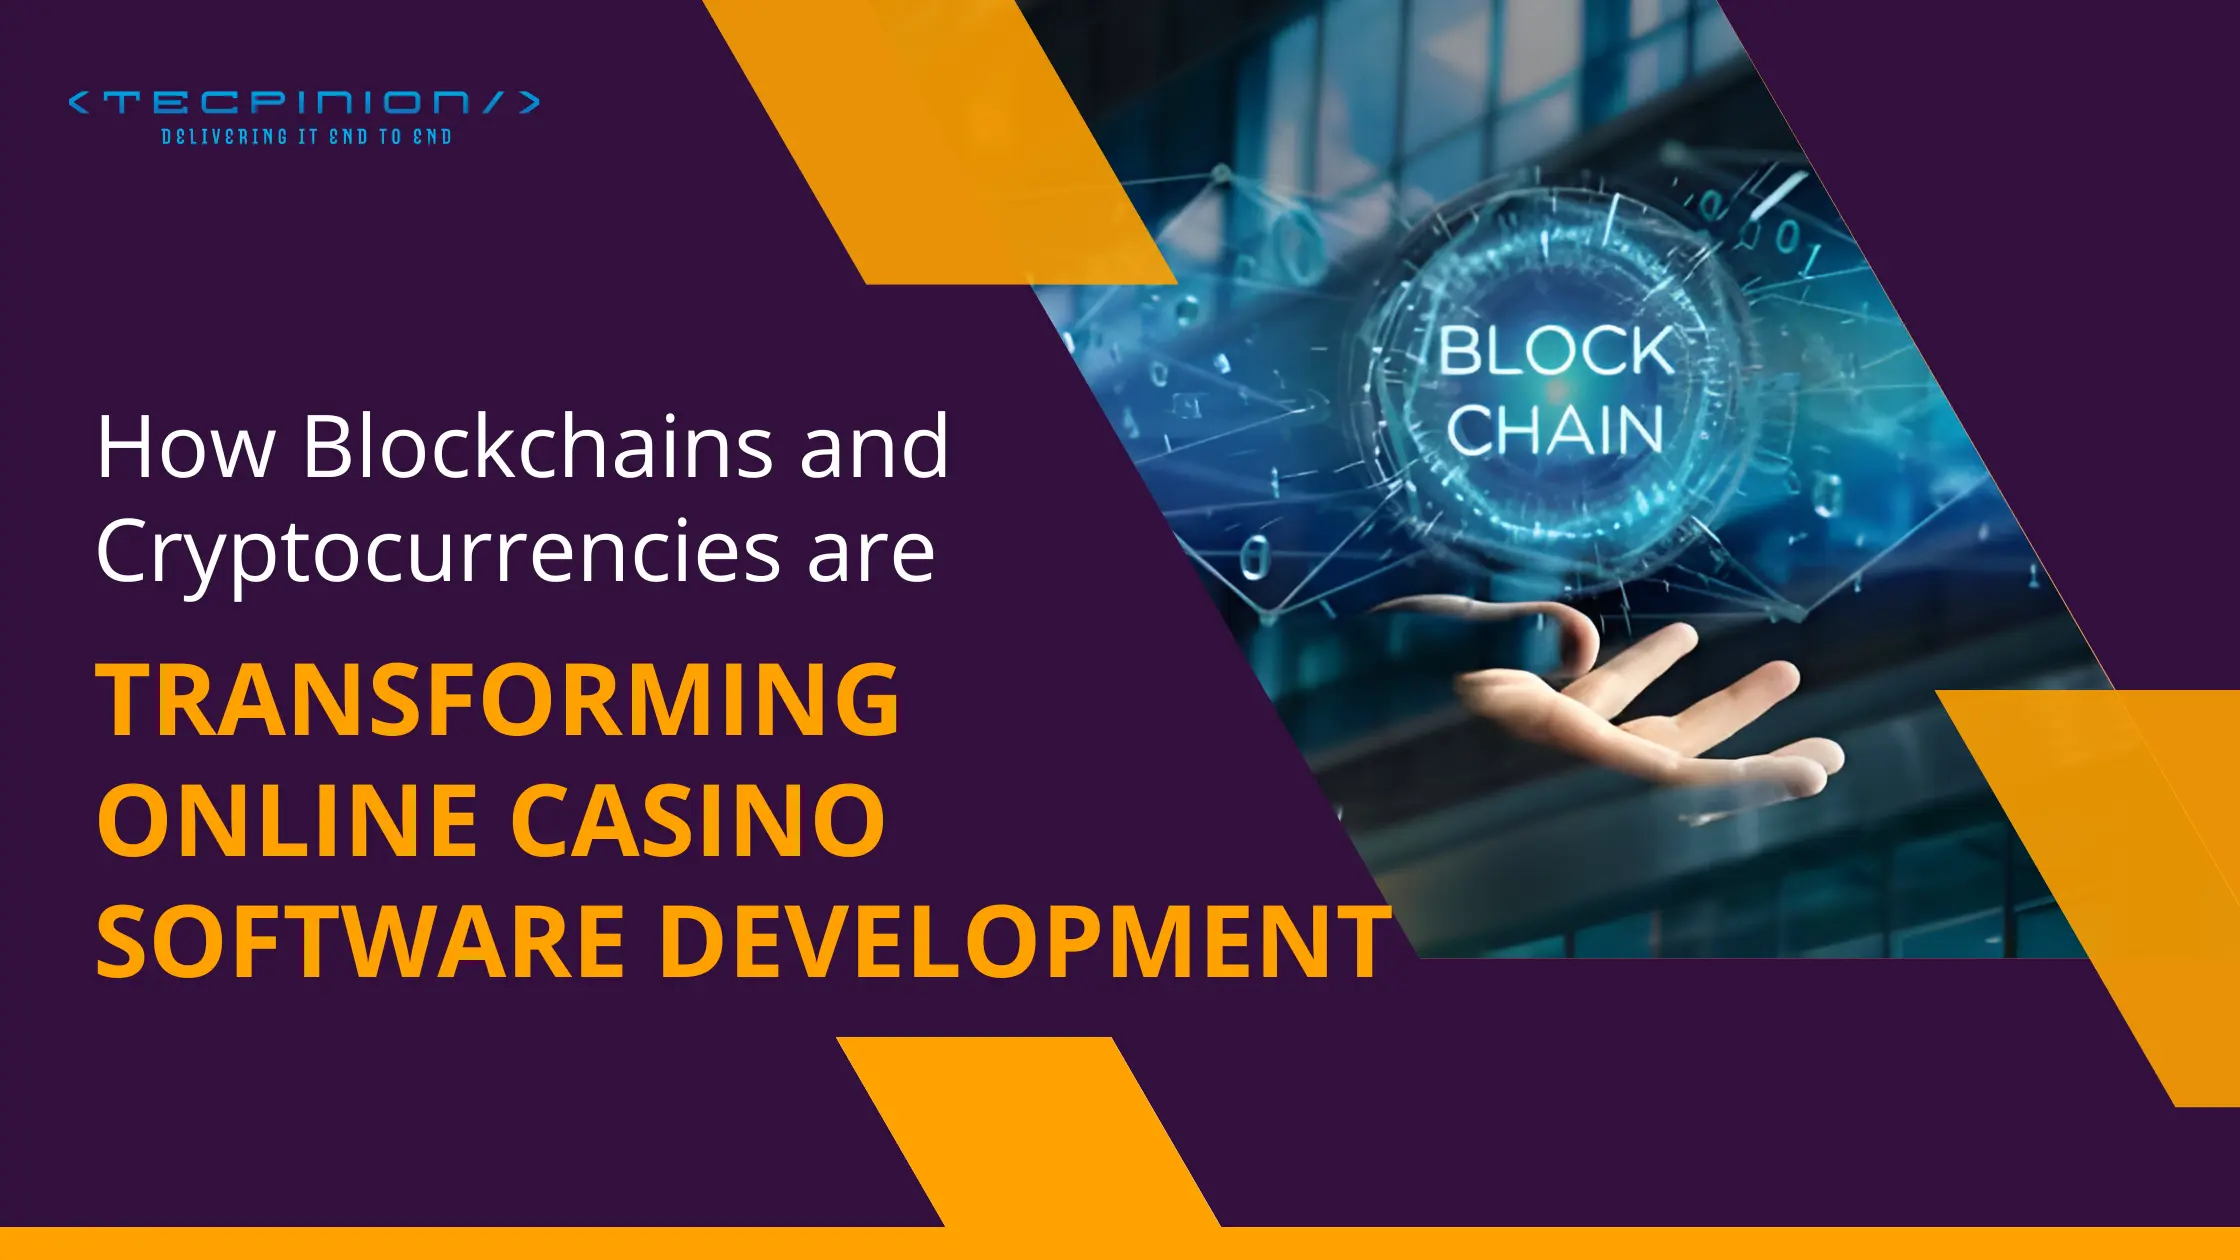 How Blockchains and Cryptocurrencies are Transforming Online Casino Software Development